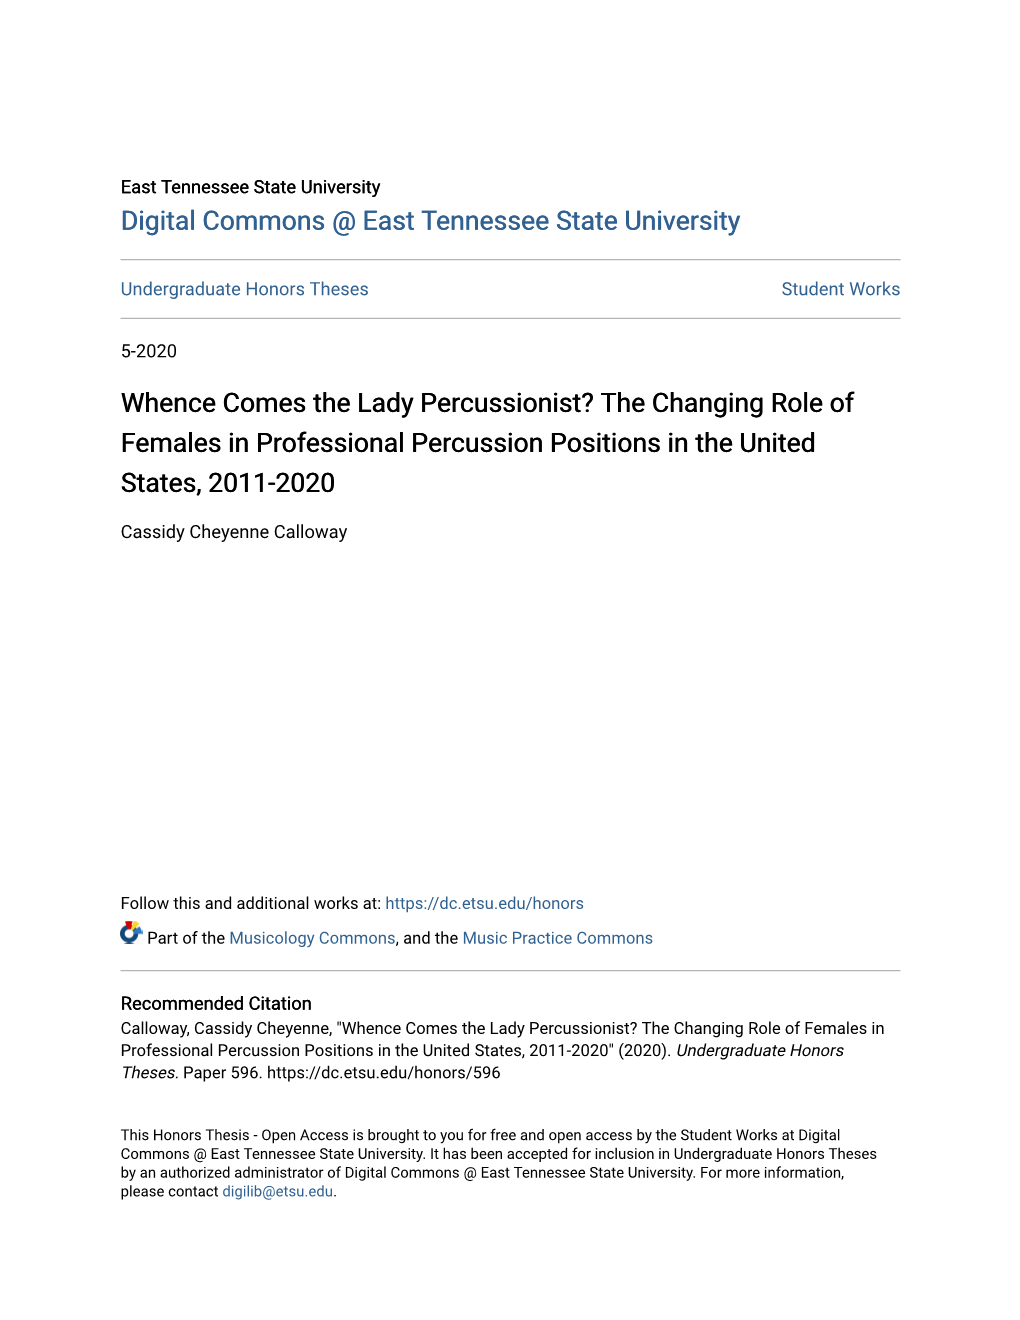 Whence Comes the Lady Percussionist? the Changing Role of Females in Professional Percussion Positions in the United States, 2011-2020